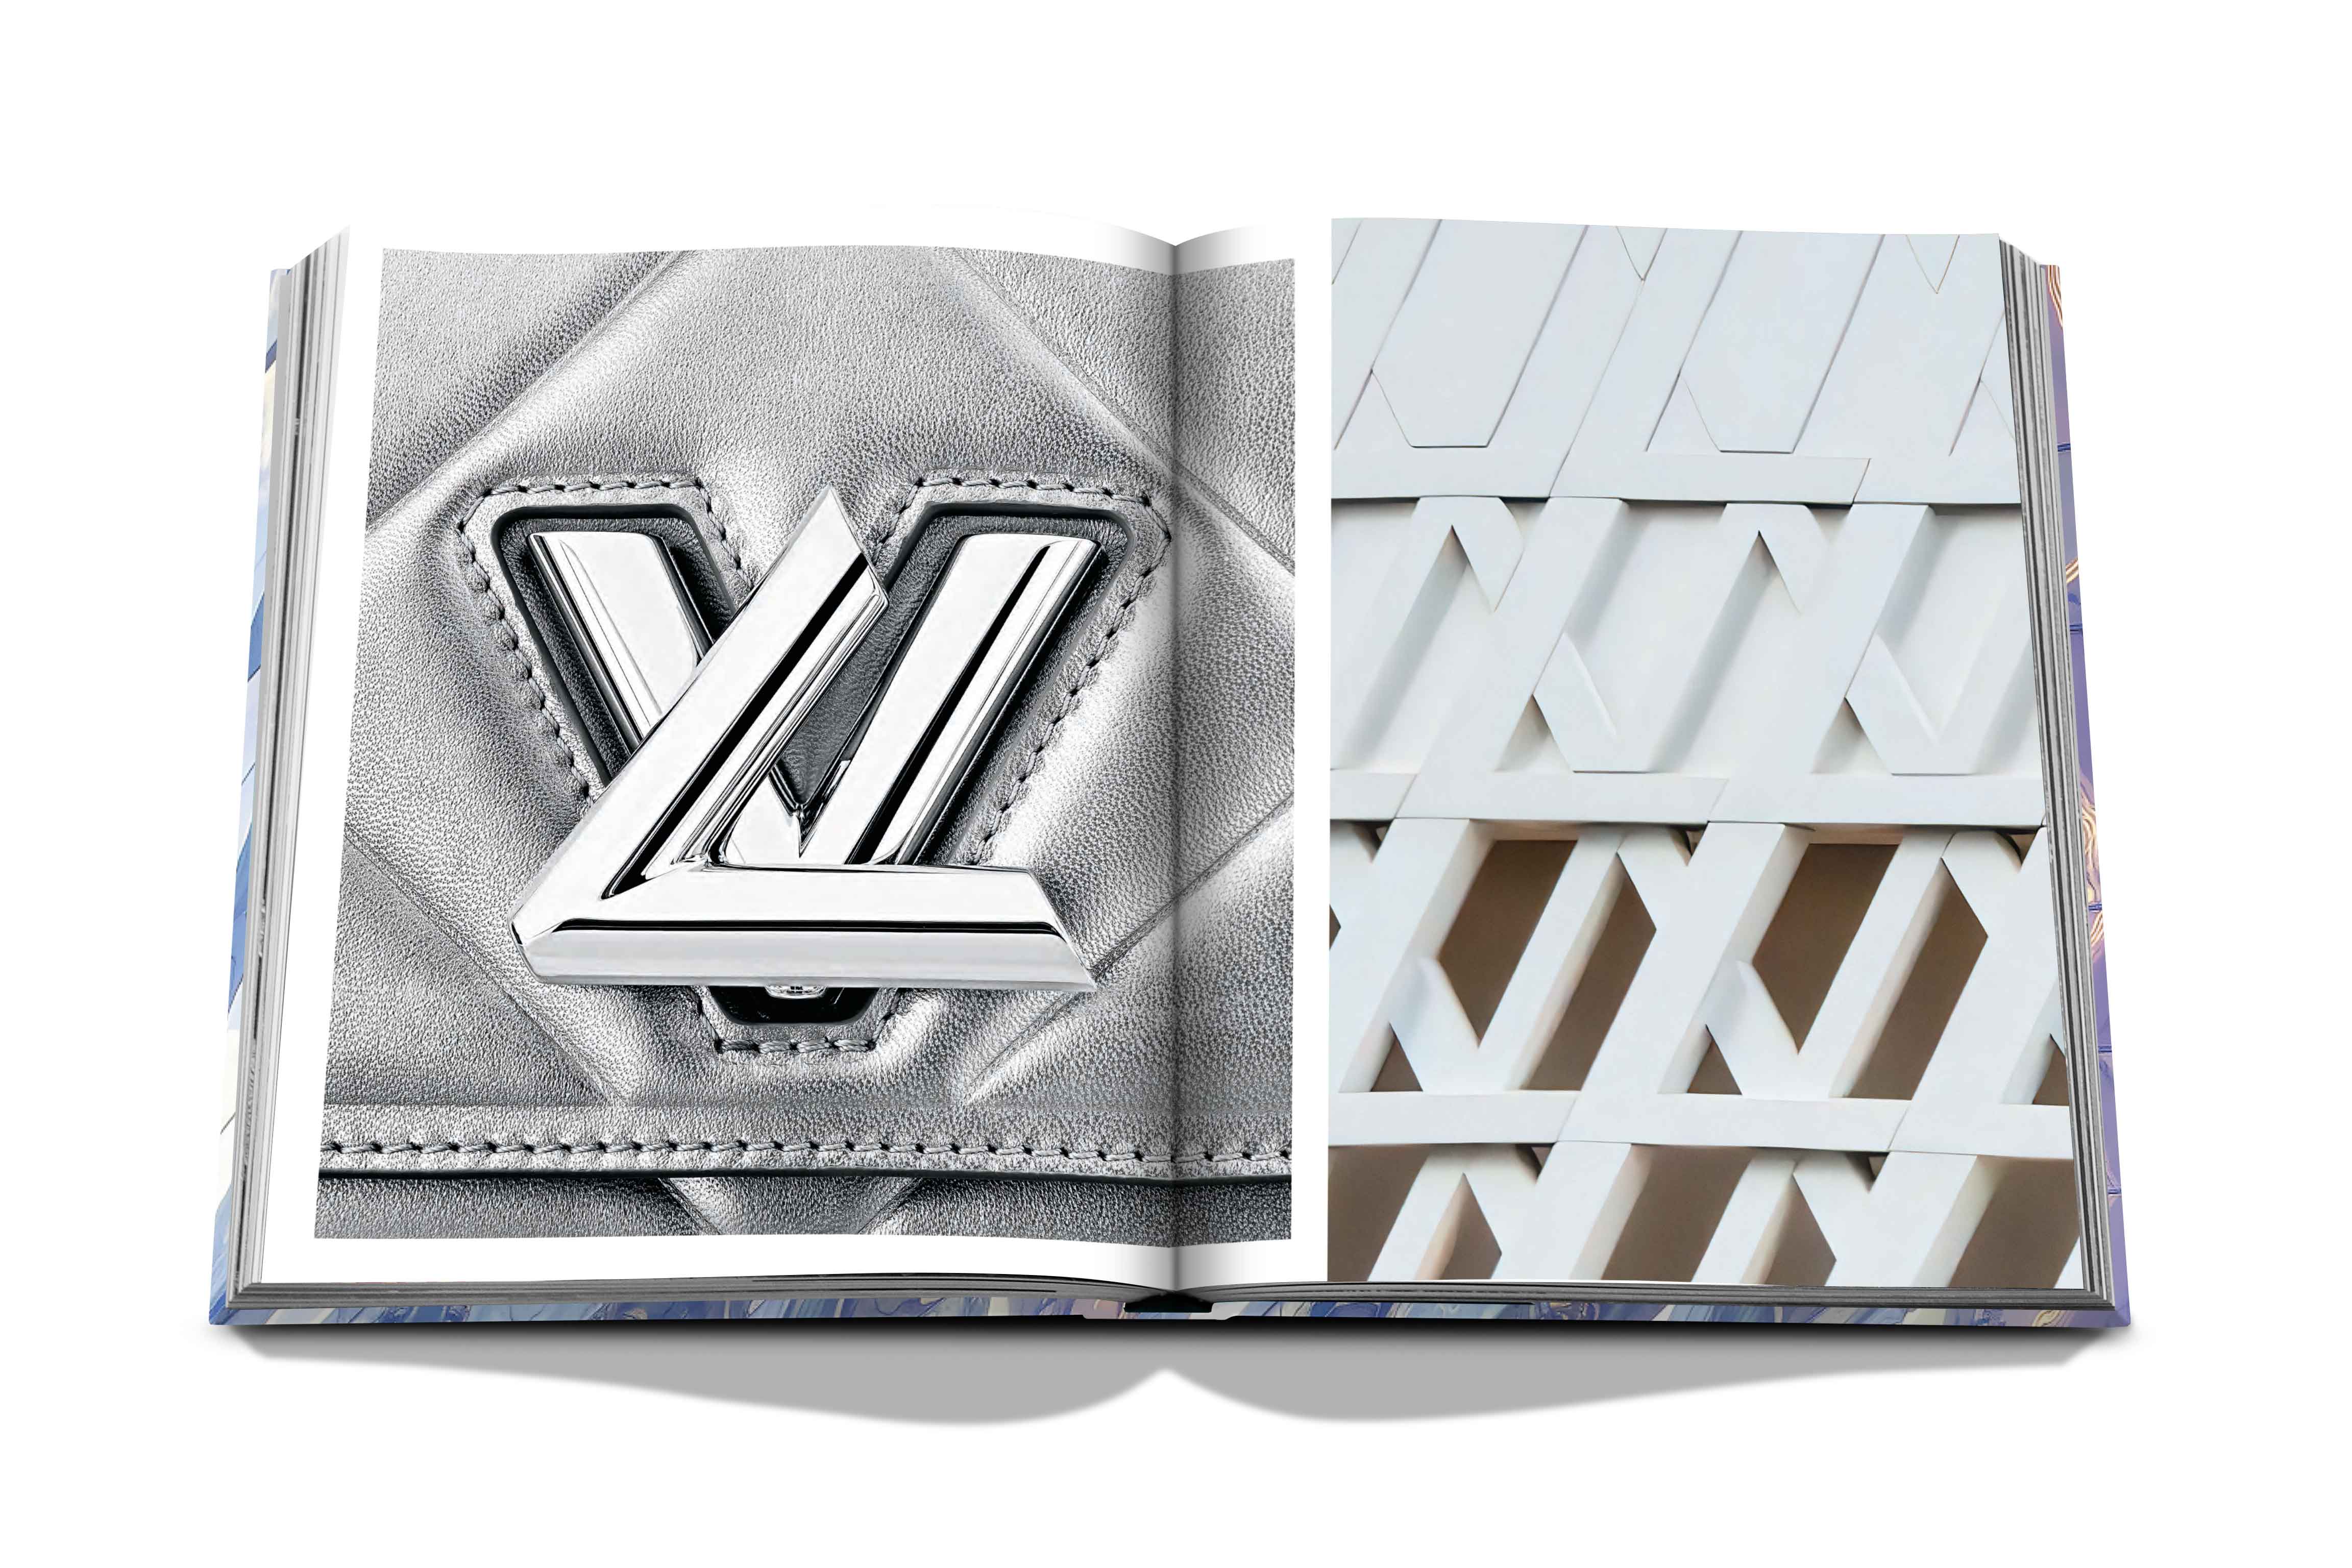 Louis Vuitton Skin: Architecture of Luxury (Tokyo Edition) – The